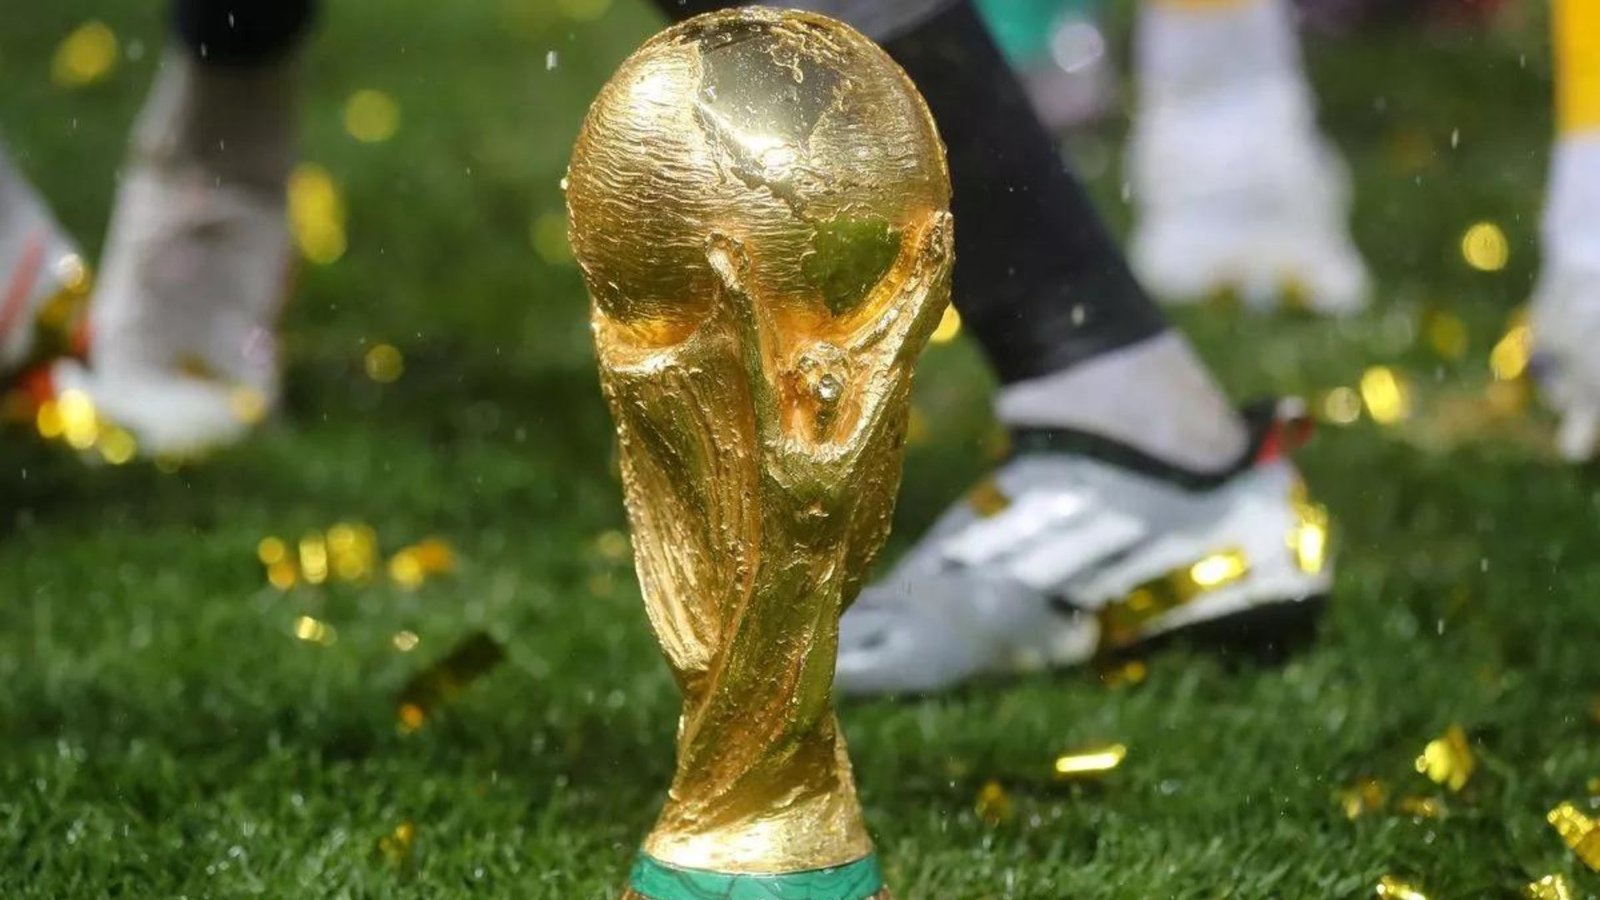 The World Cup Golden Trophy on the Grasss